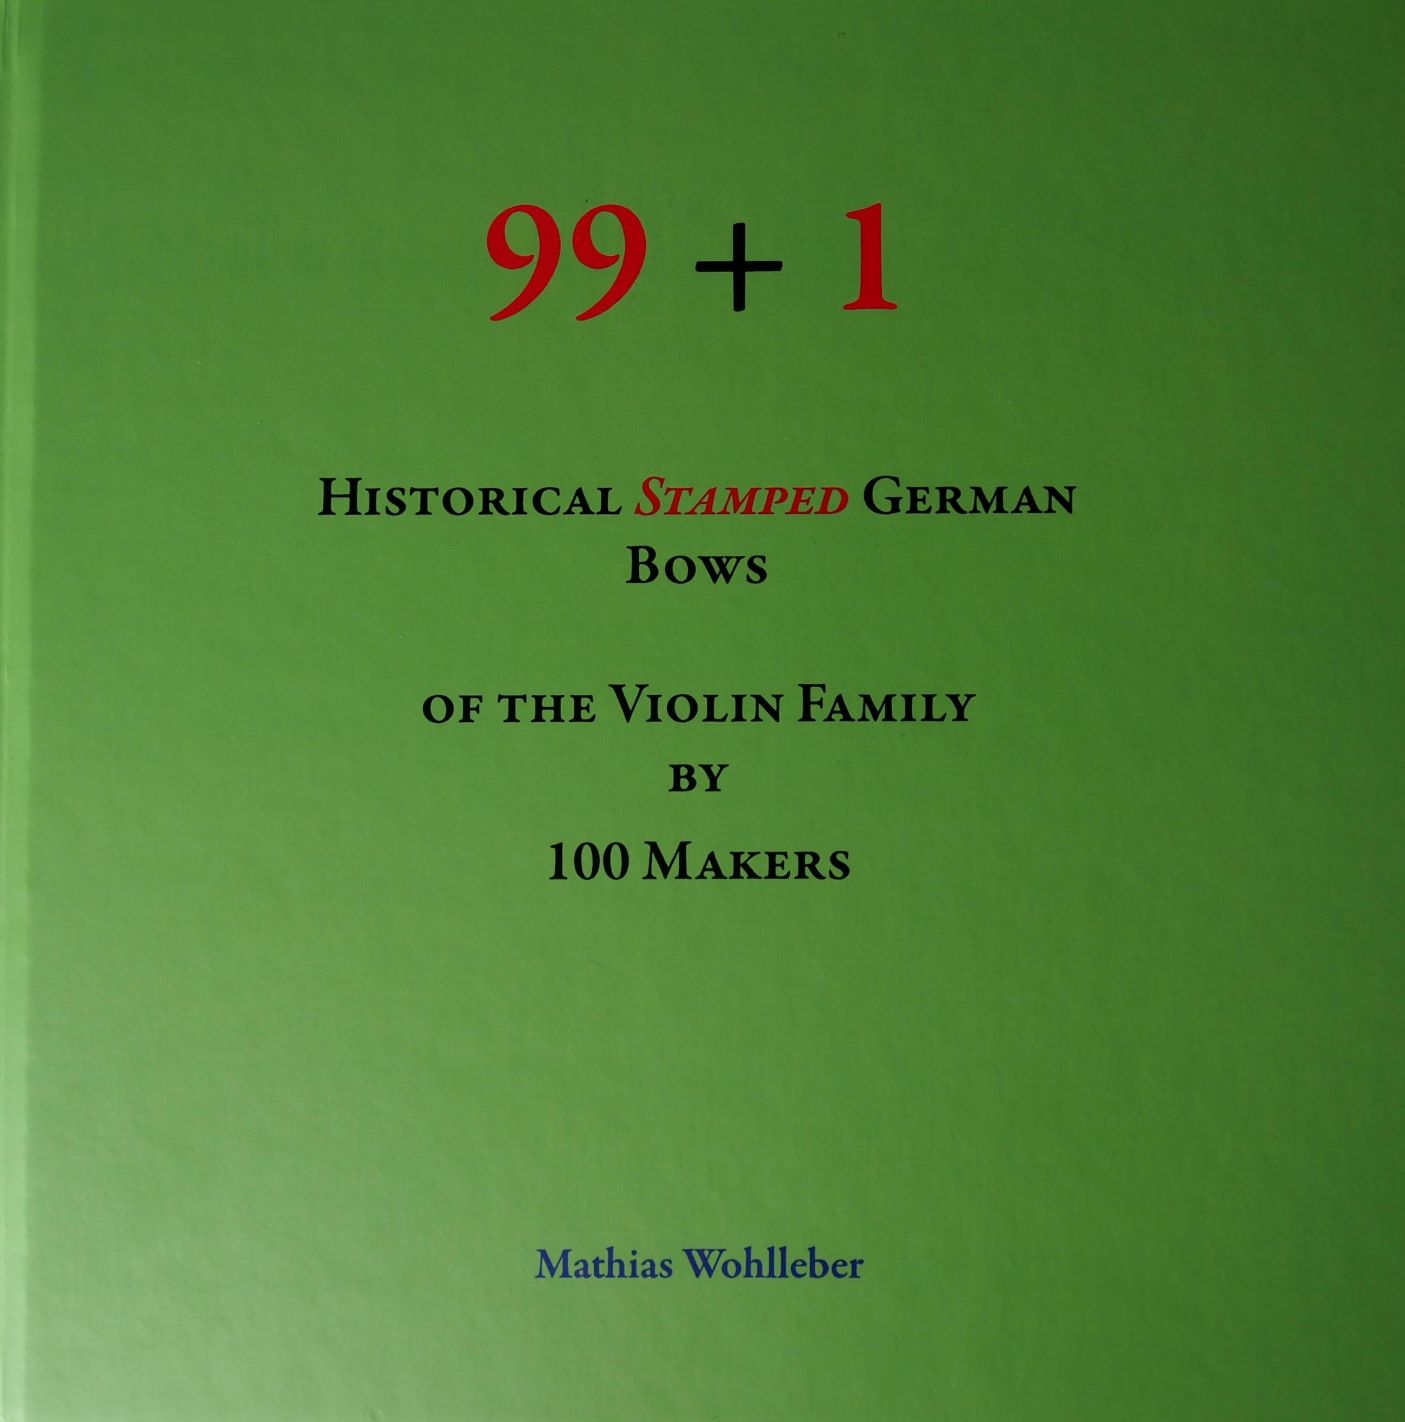 99+1 Historical Stamped German Bows of the Violin Family